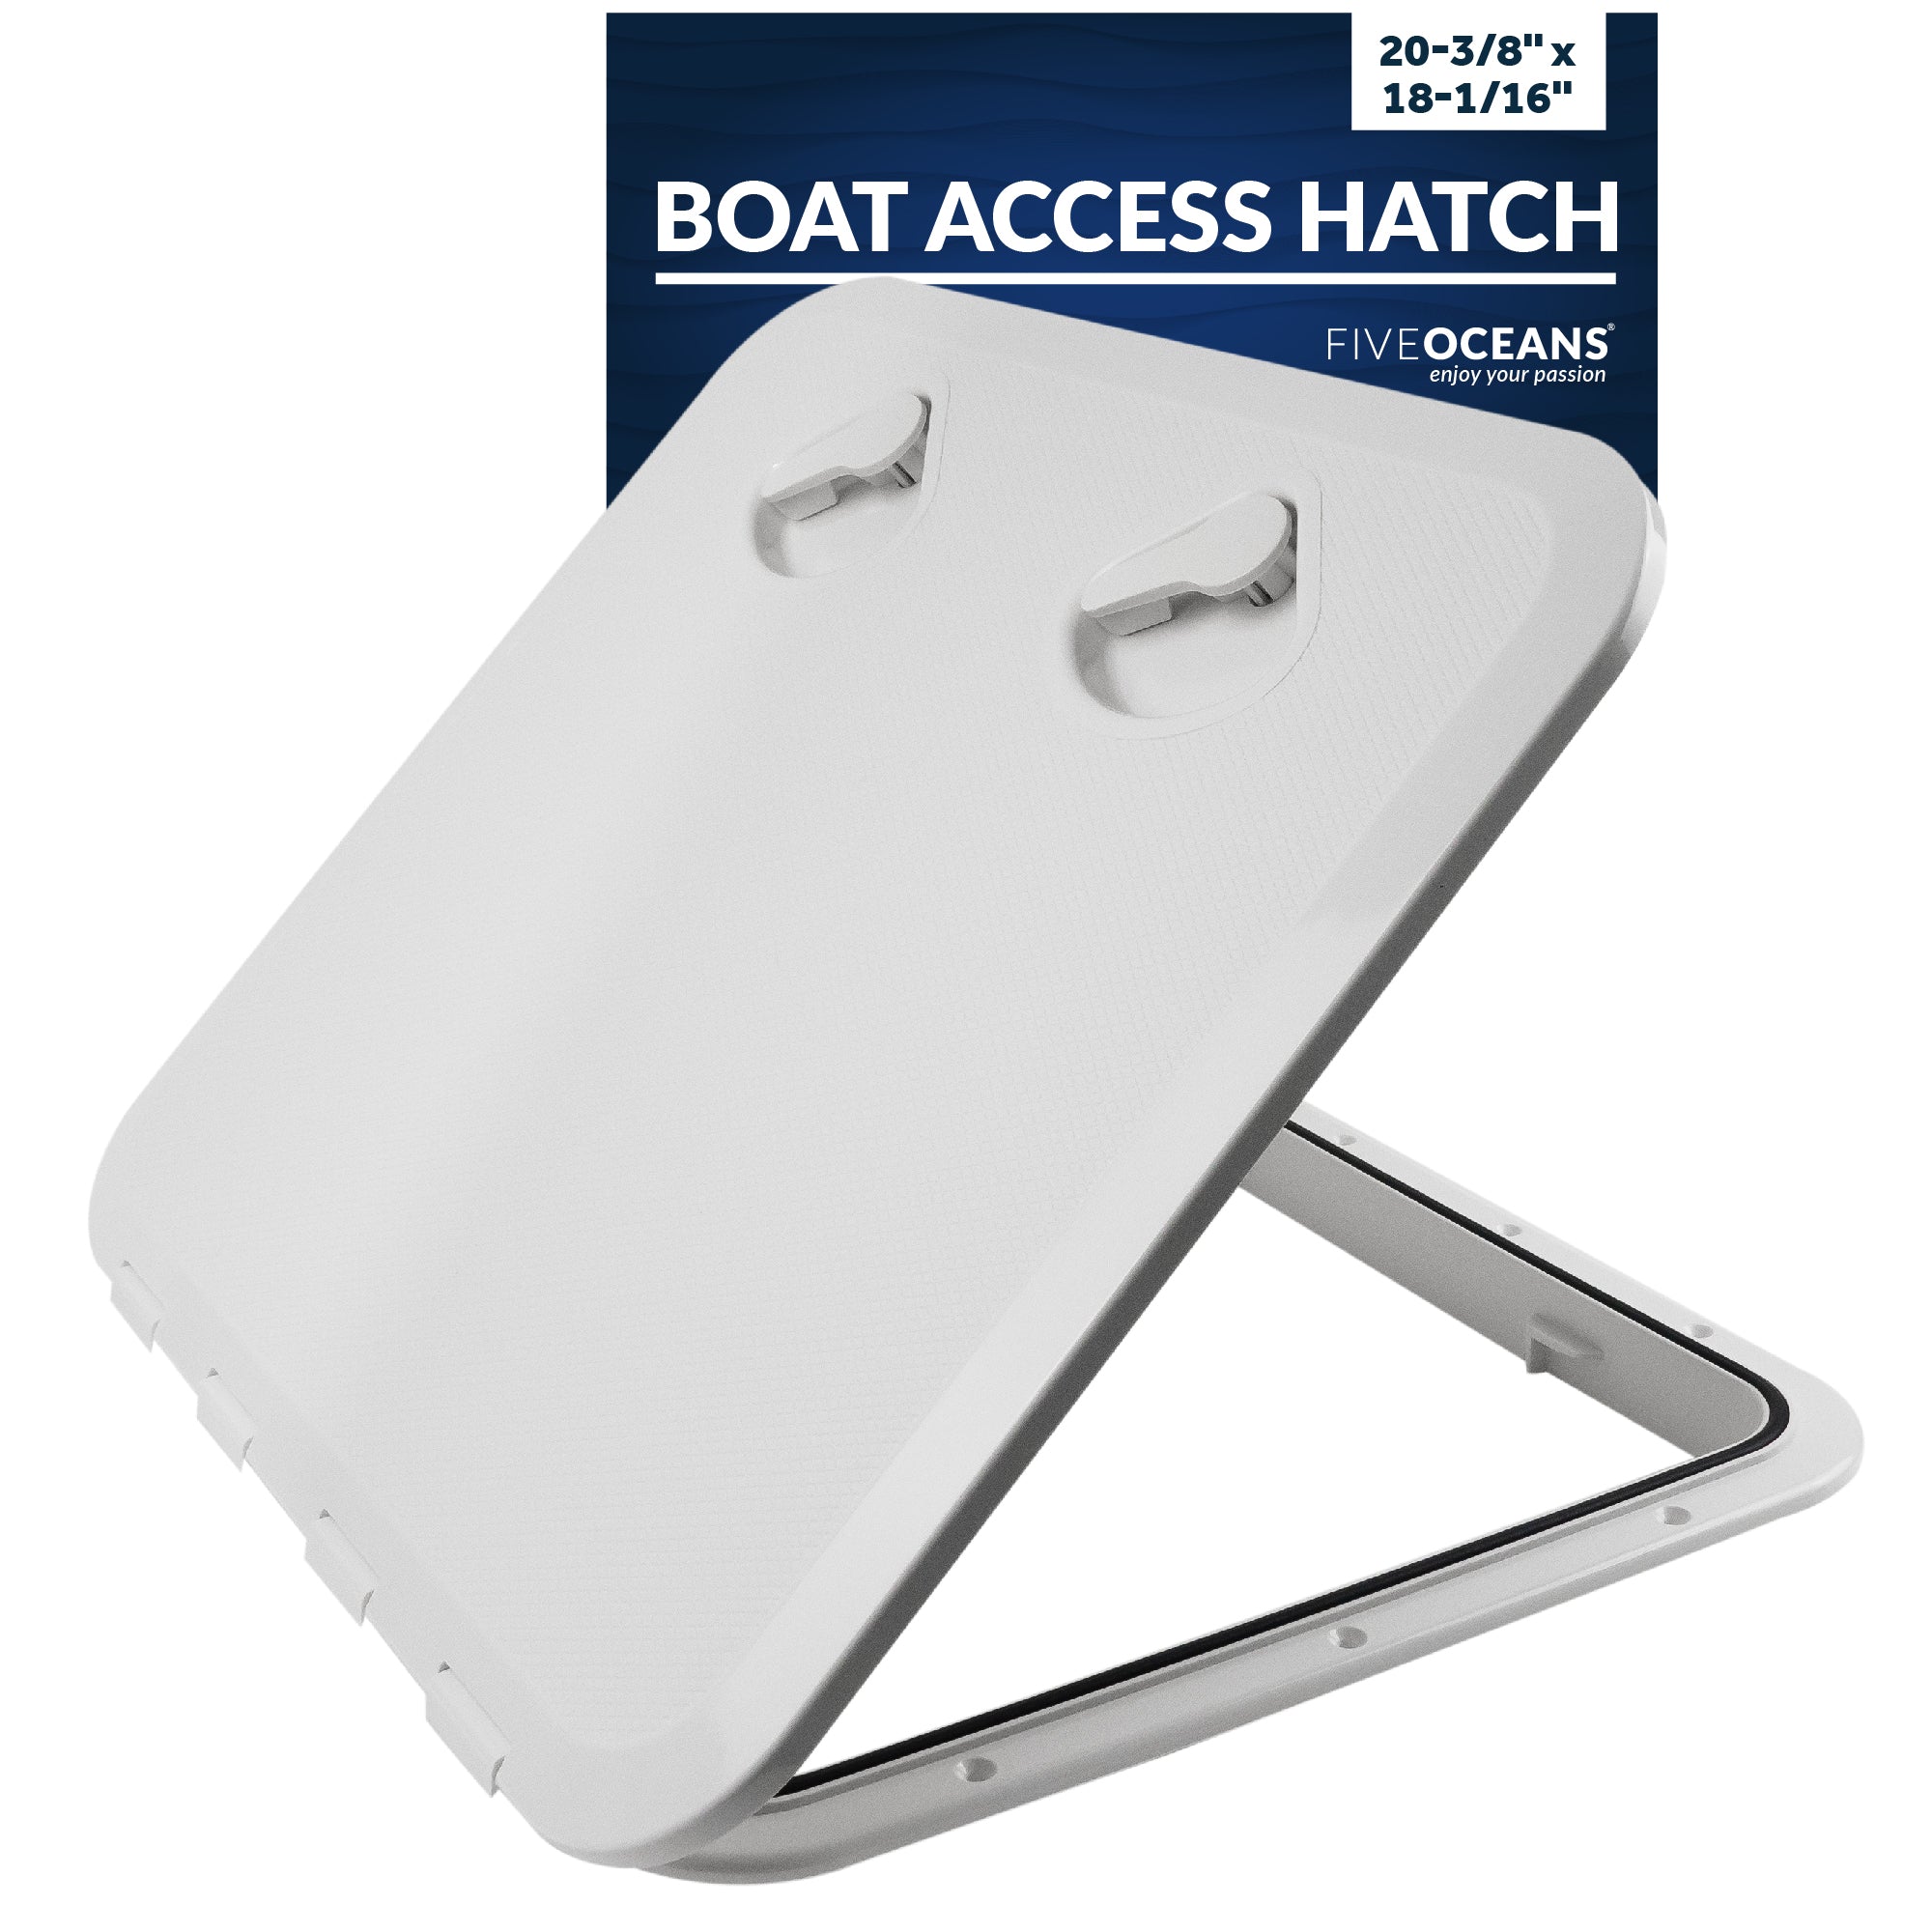 Boat Access Hatch, 20-3/8" x 18-1/16" Recessed Handle Locking System, White - FO3863